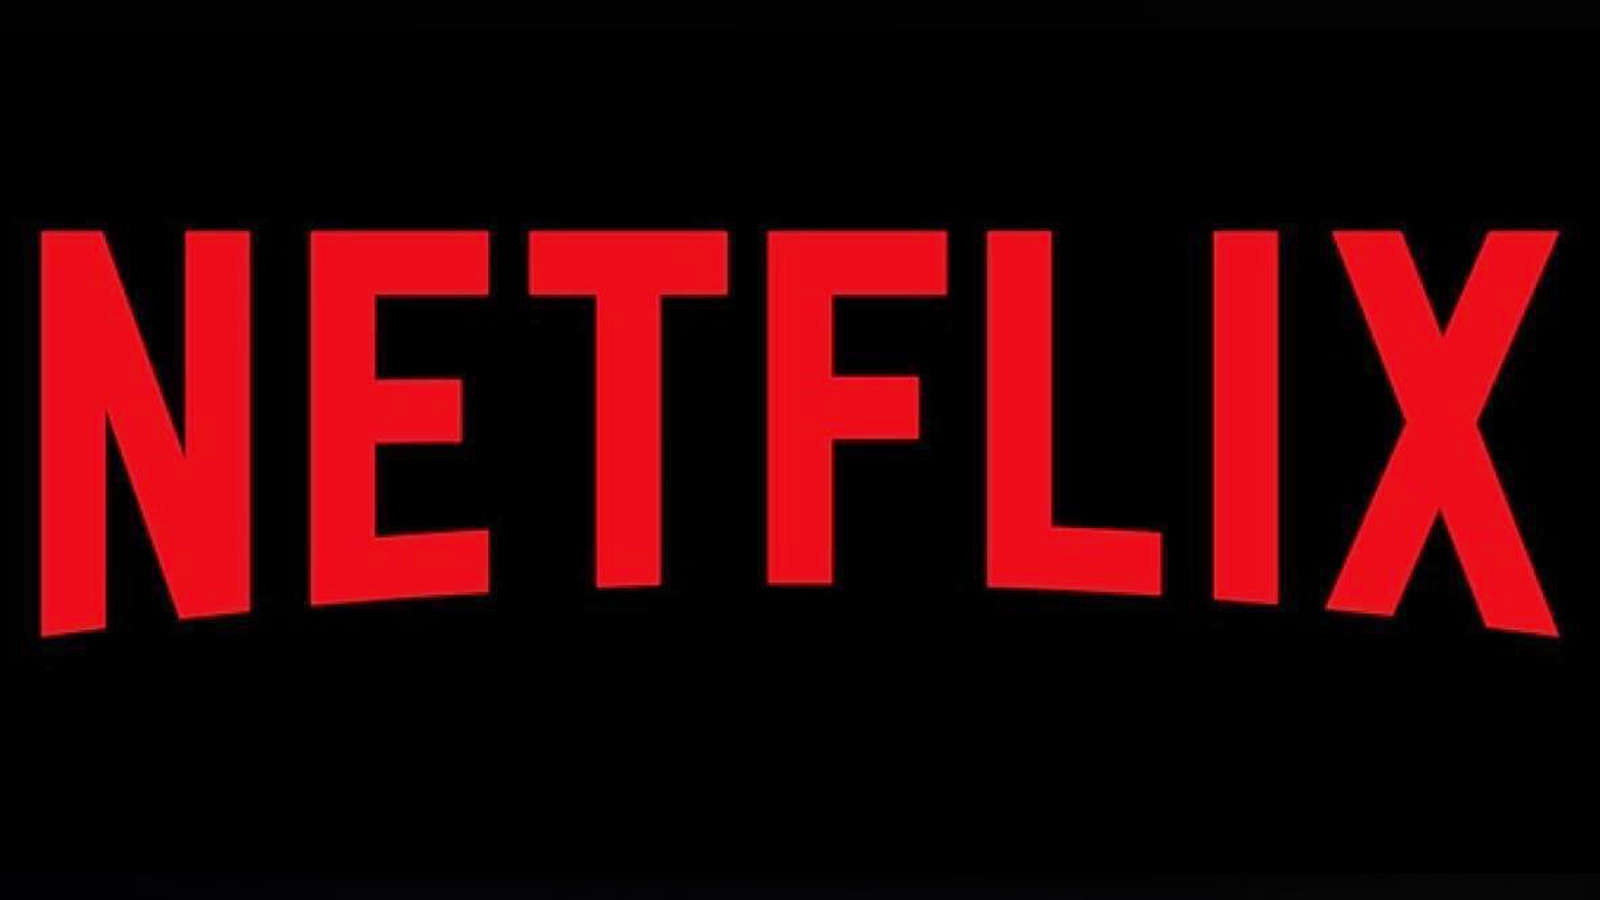 Netflix says its Rs 199 mobile only plan in India had ‘better’ retention